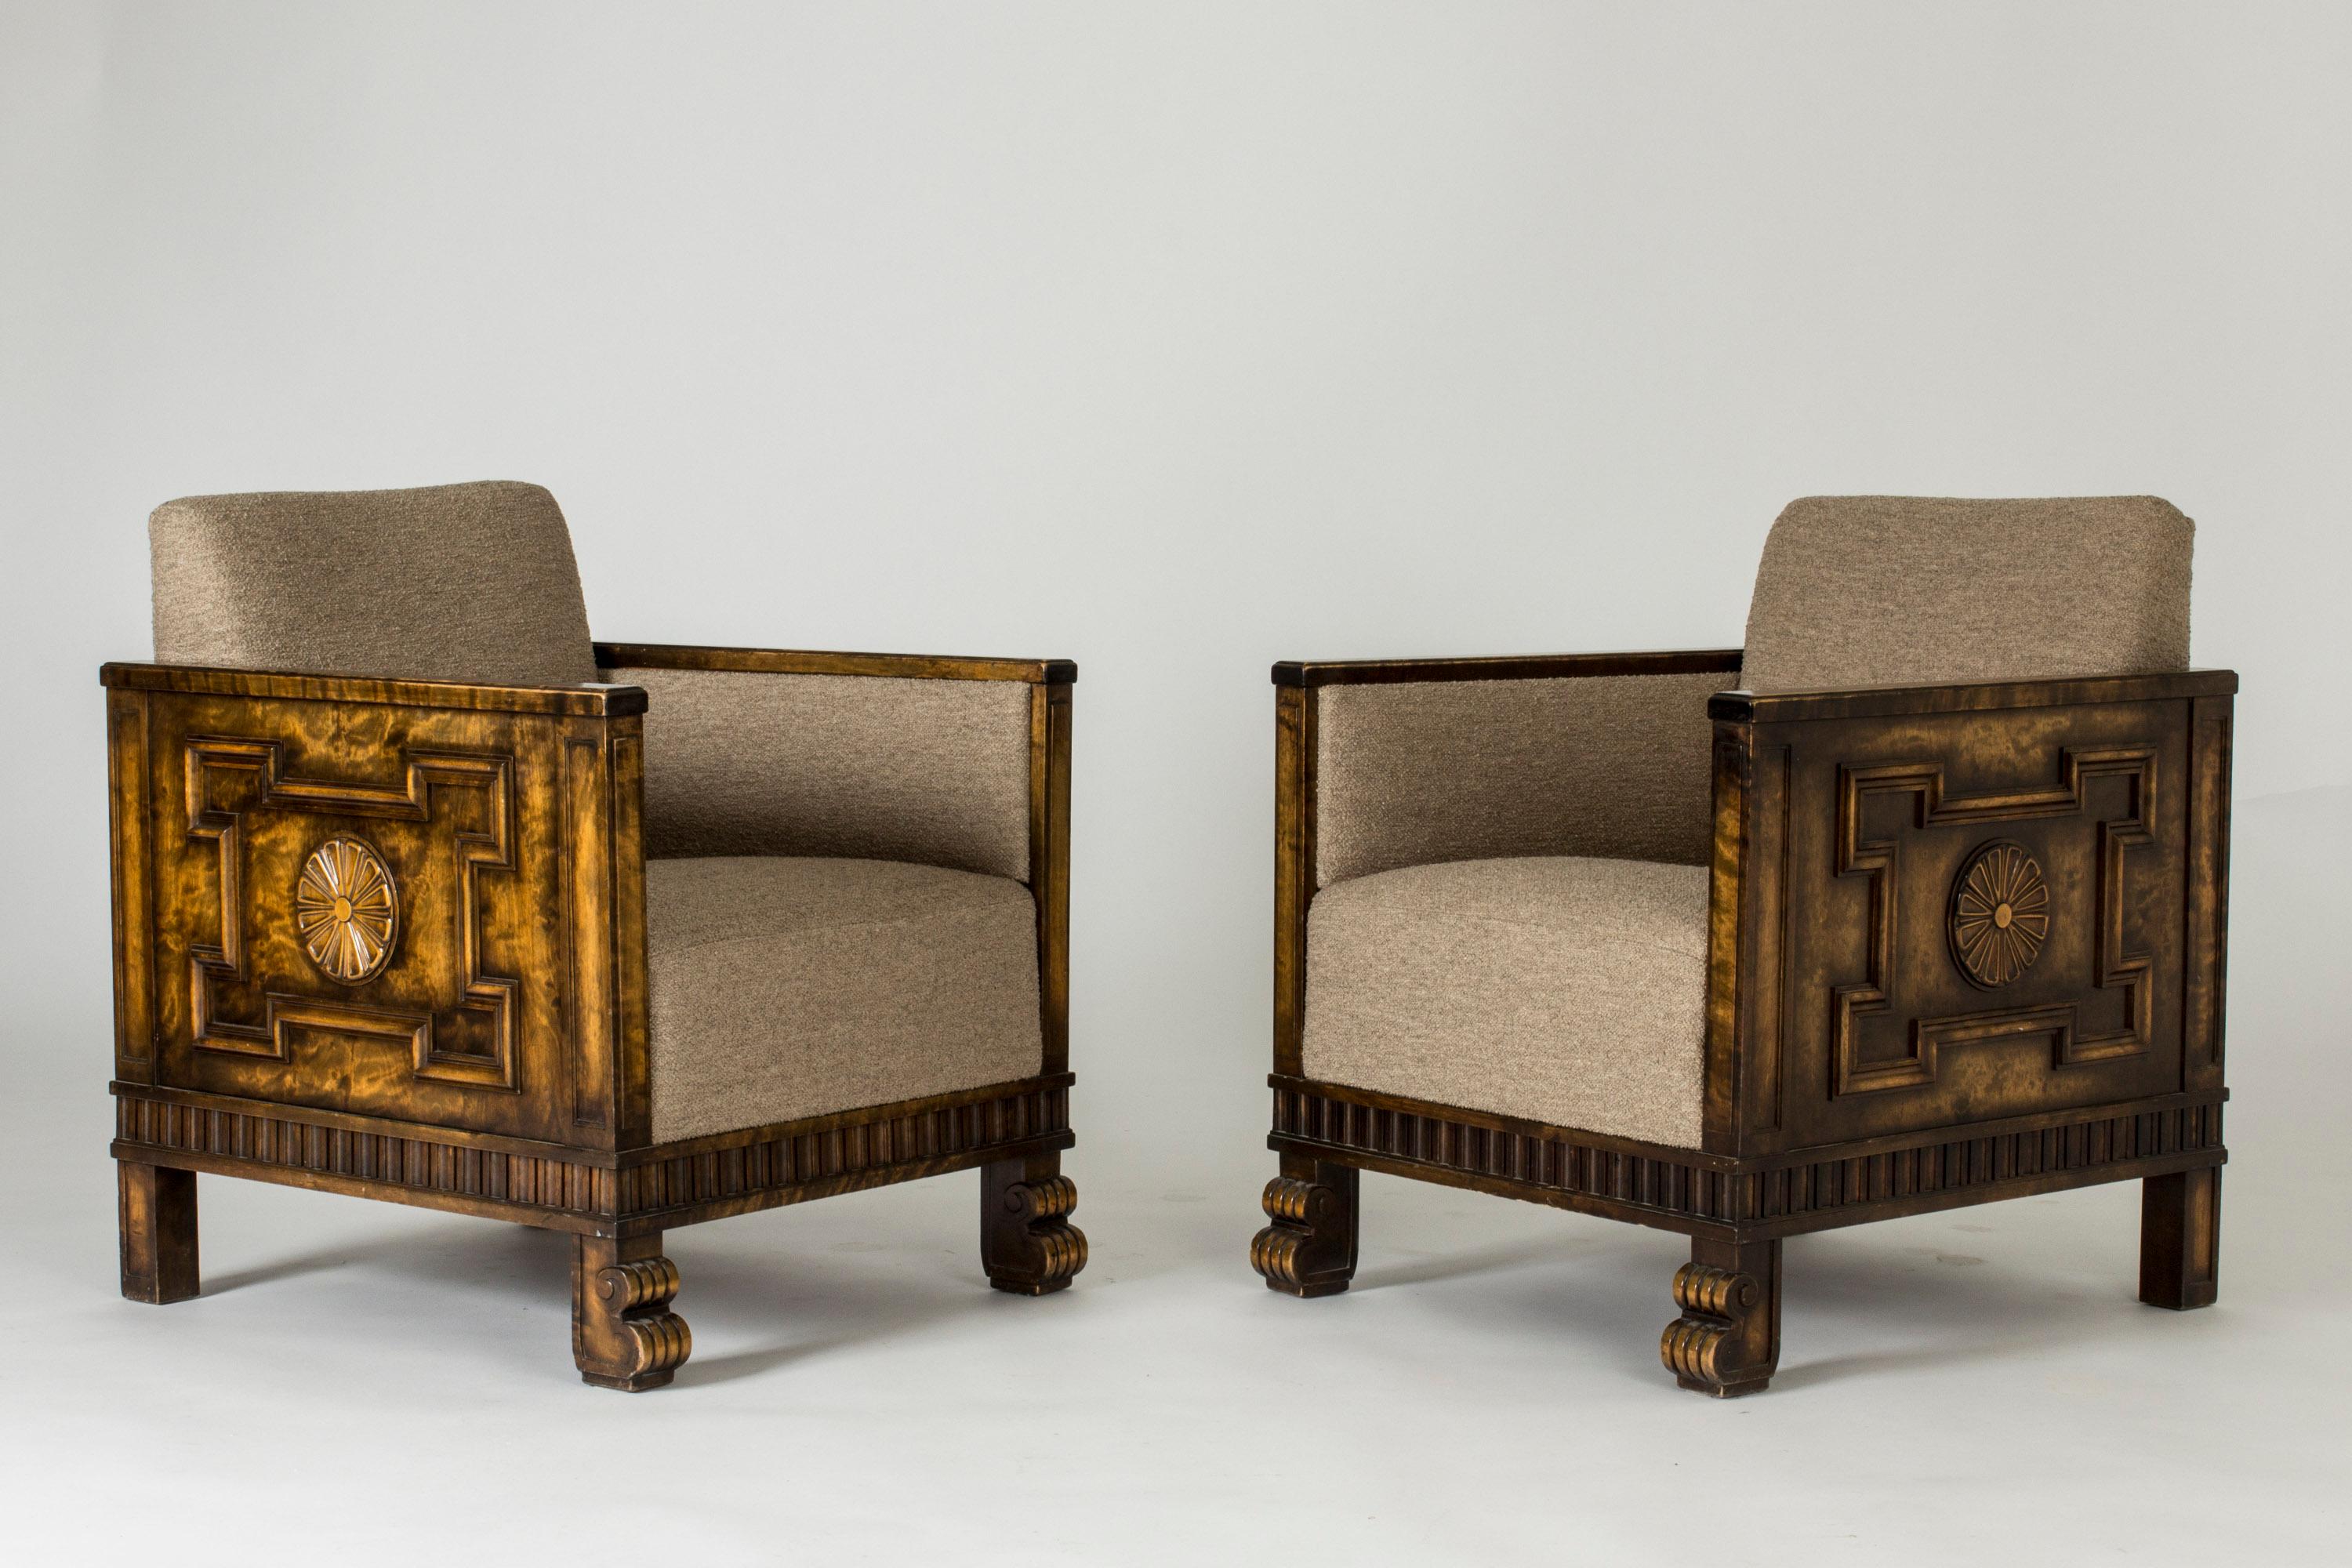 Pair of imposing lounge chairs by Axel Einar Hjorth, in a cubical design with rich ornamental decor. Made from dark stained birch, with bouclé upholstery. Striking combination of modernist lines and baroque influences.